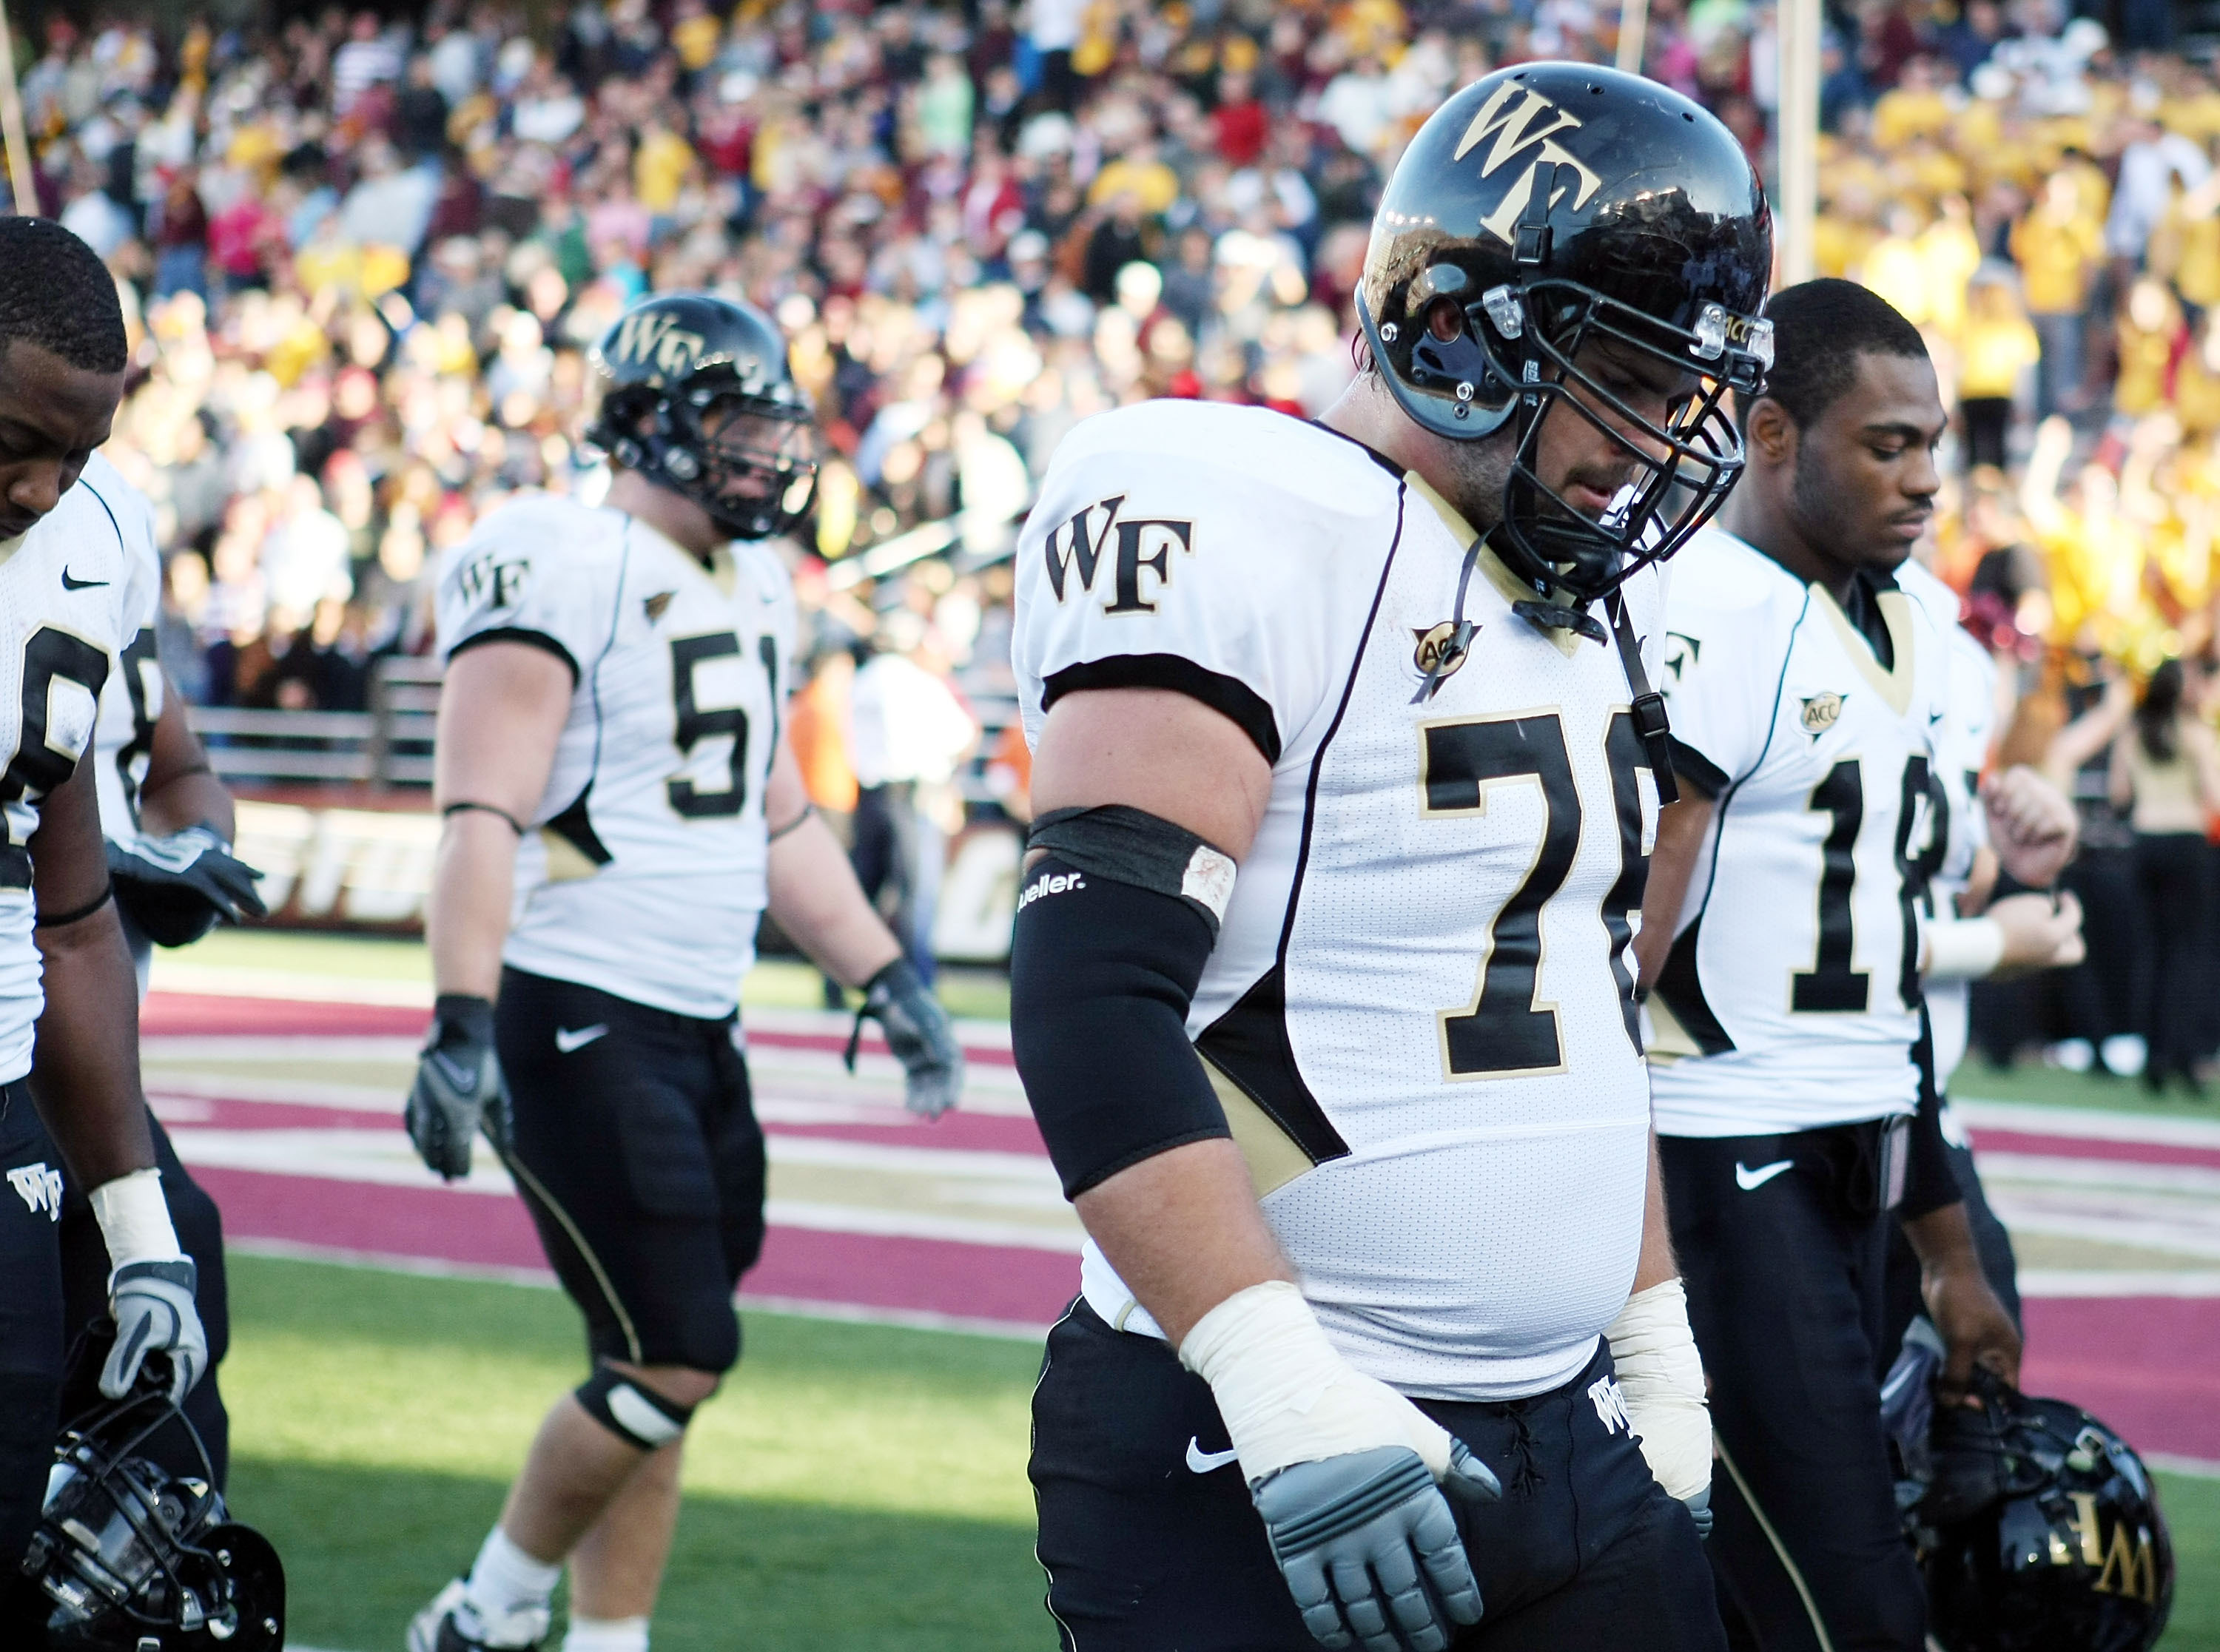 CHESTNUT HILL, MA - SEPTEMBER 26:  Joe Birdsong #76, John Russell #51 and Danny Dembry #18 of the Wake Forest Demon Deacons walk off the field after the loss to the Boston College Eagles on September 26, 2009 at Alumni Stadium in Chestnut Hill, Massachuse